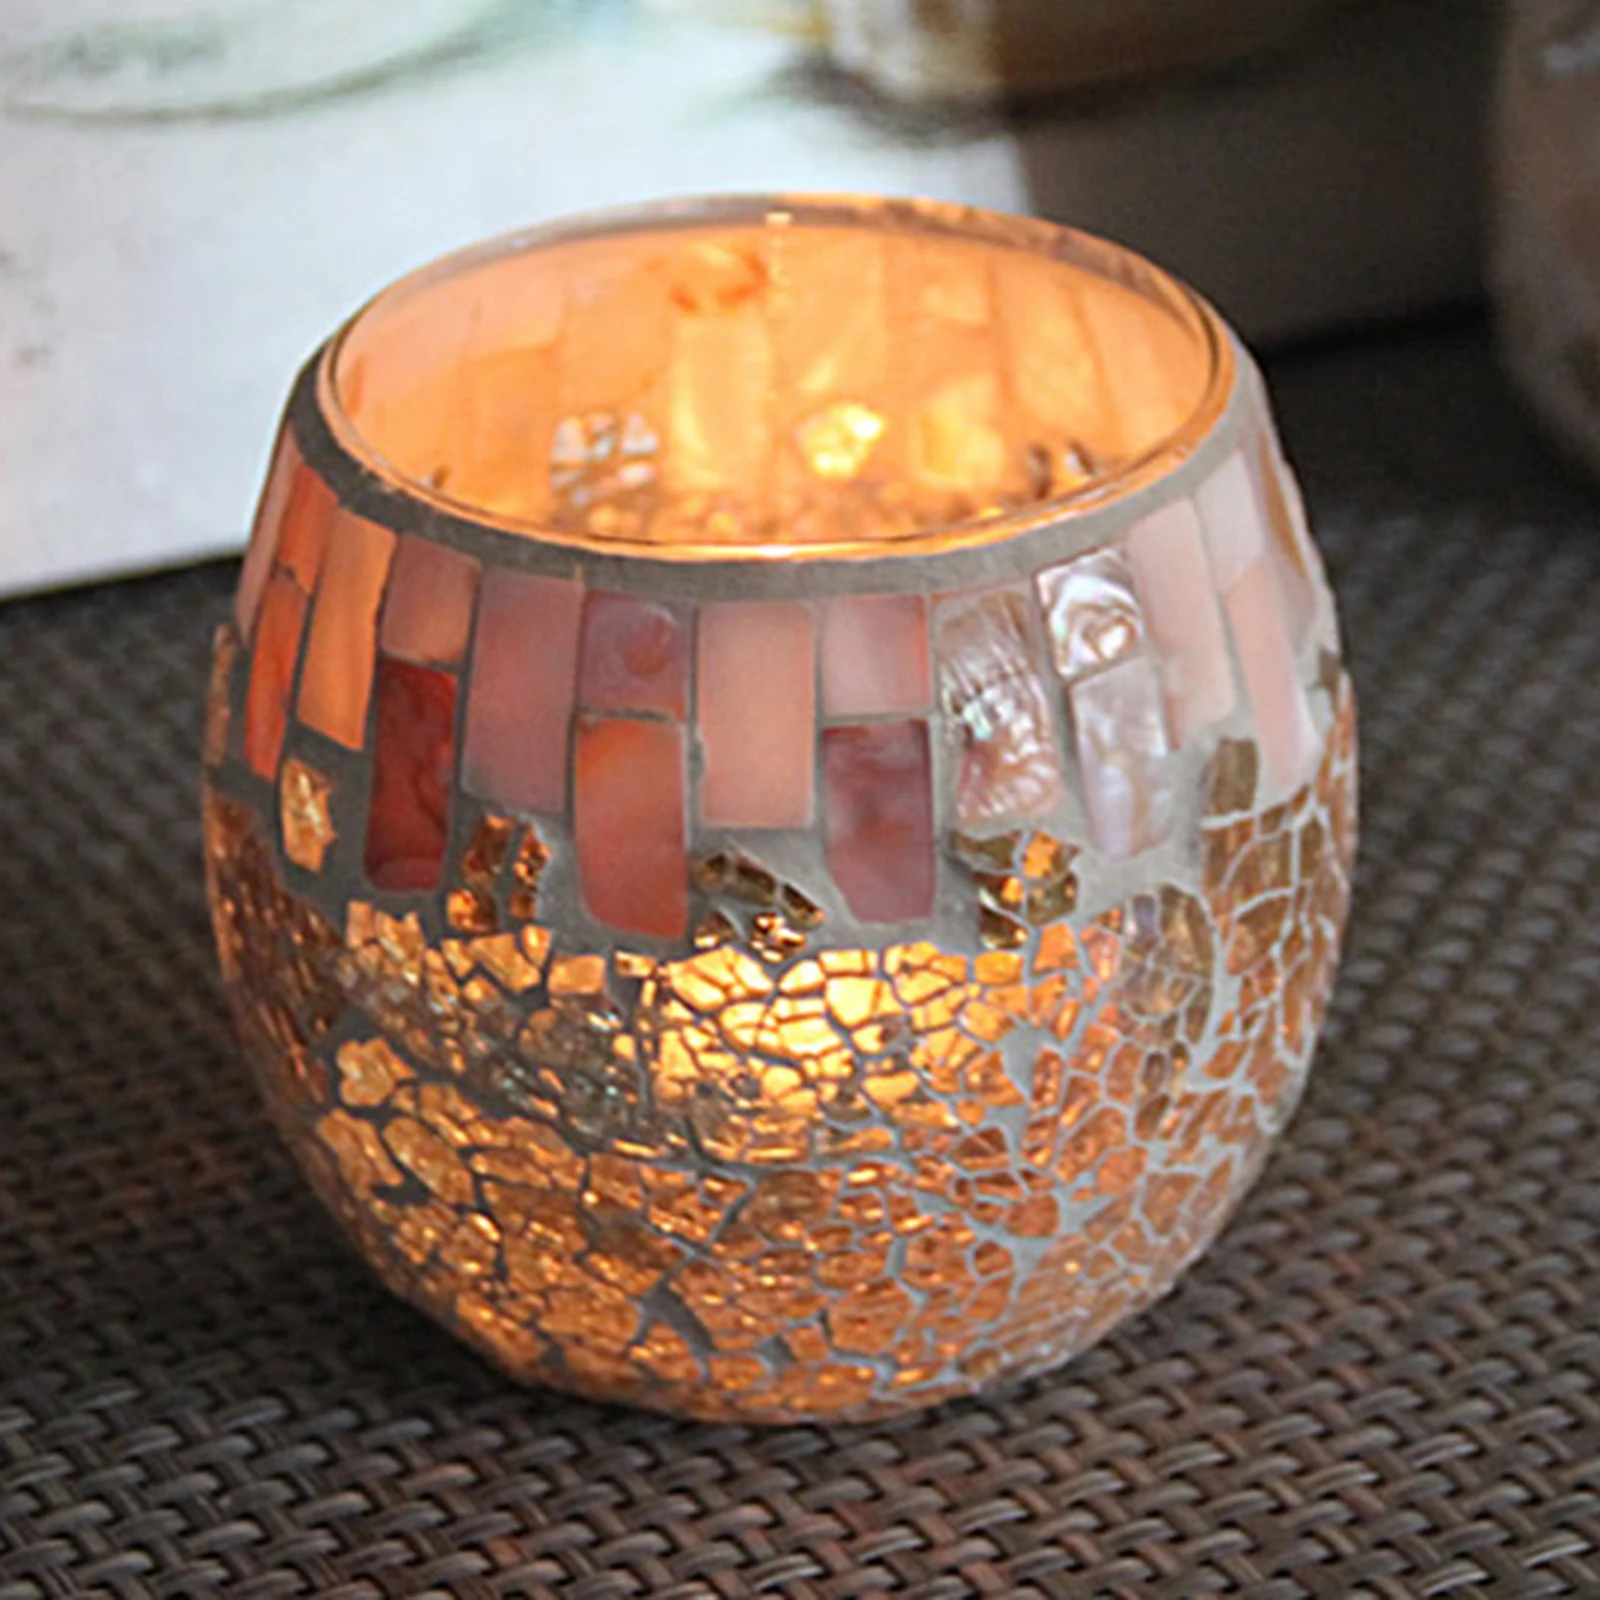 Mosaic Glass Candle Holders, Tea Light Holders Handmade Artwork Gifts for Home